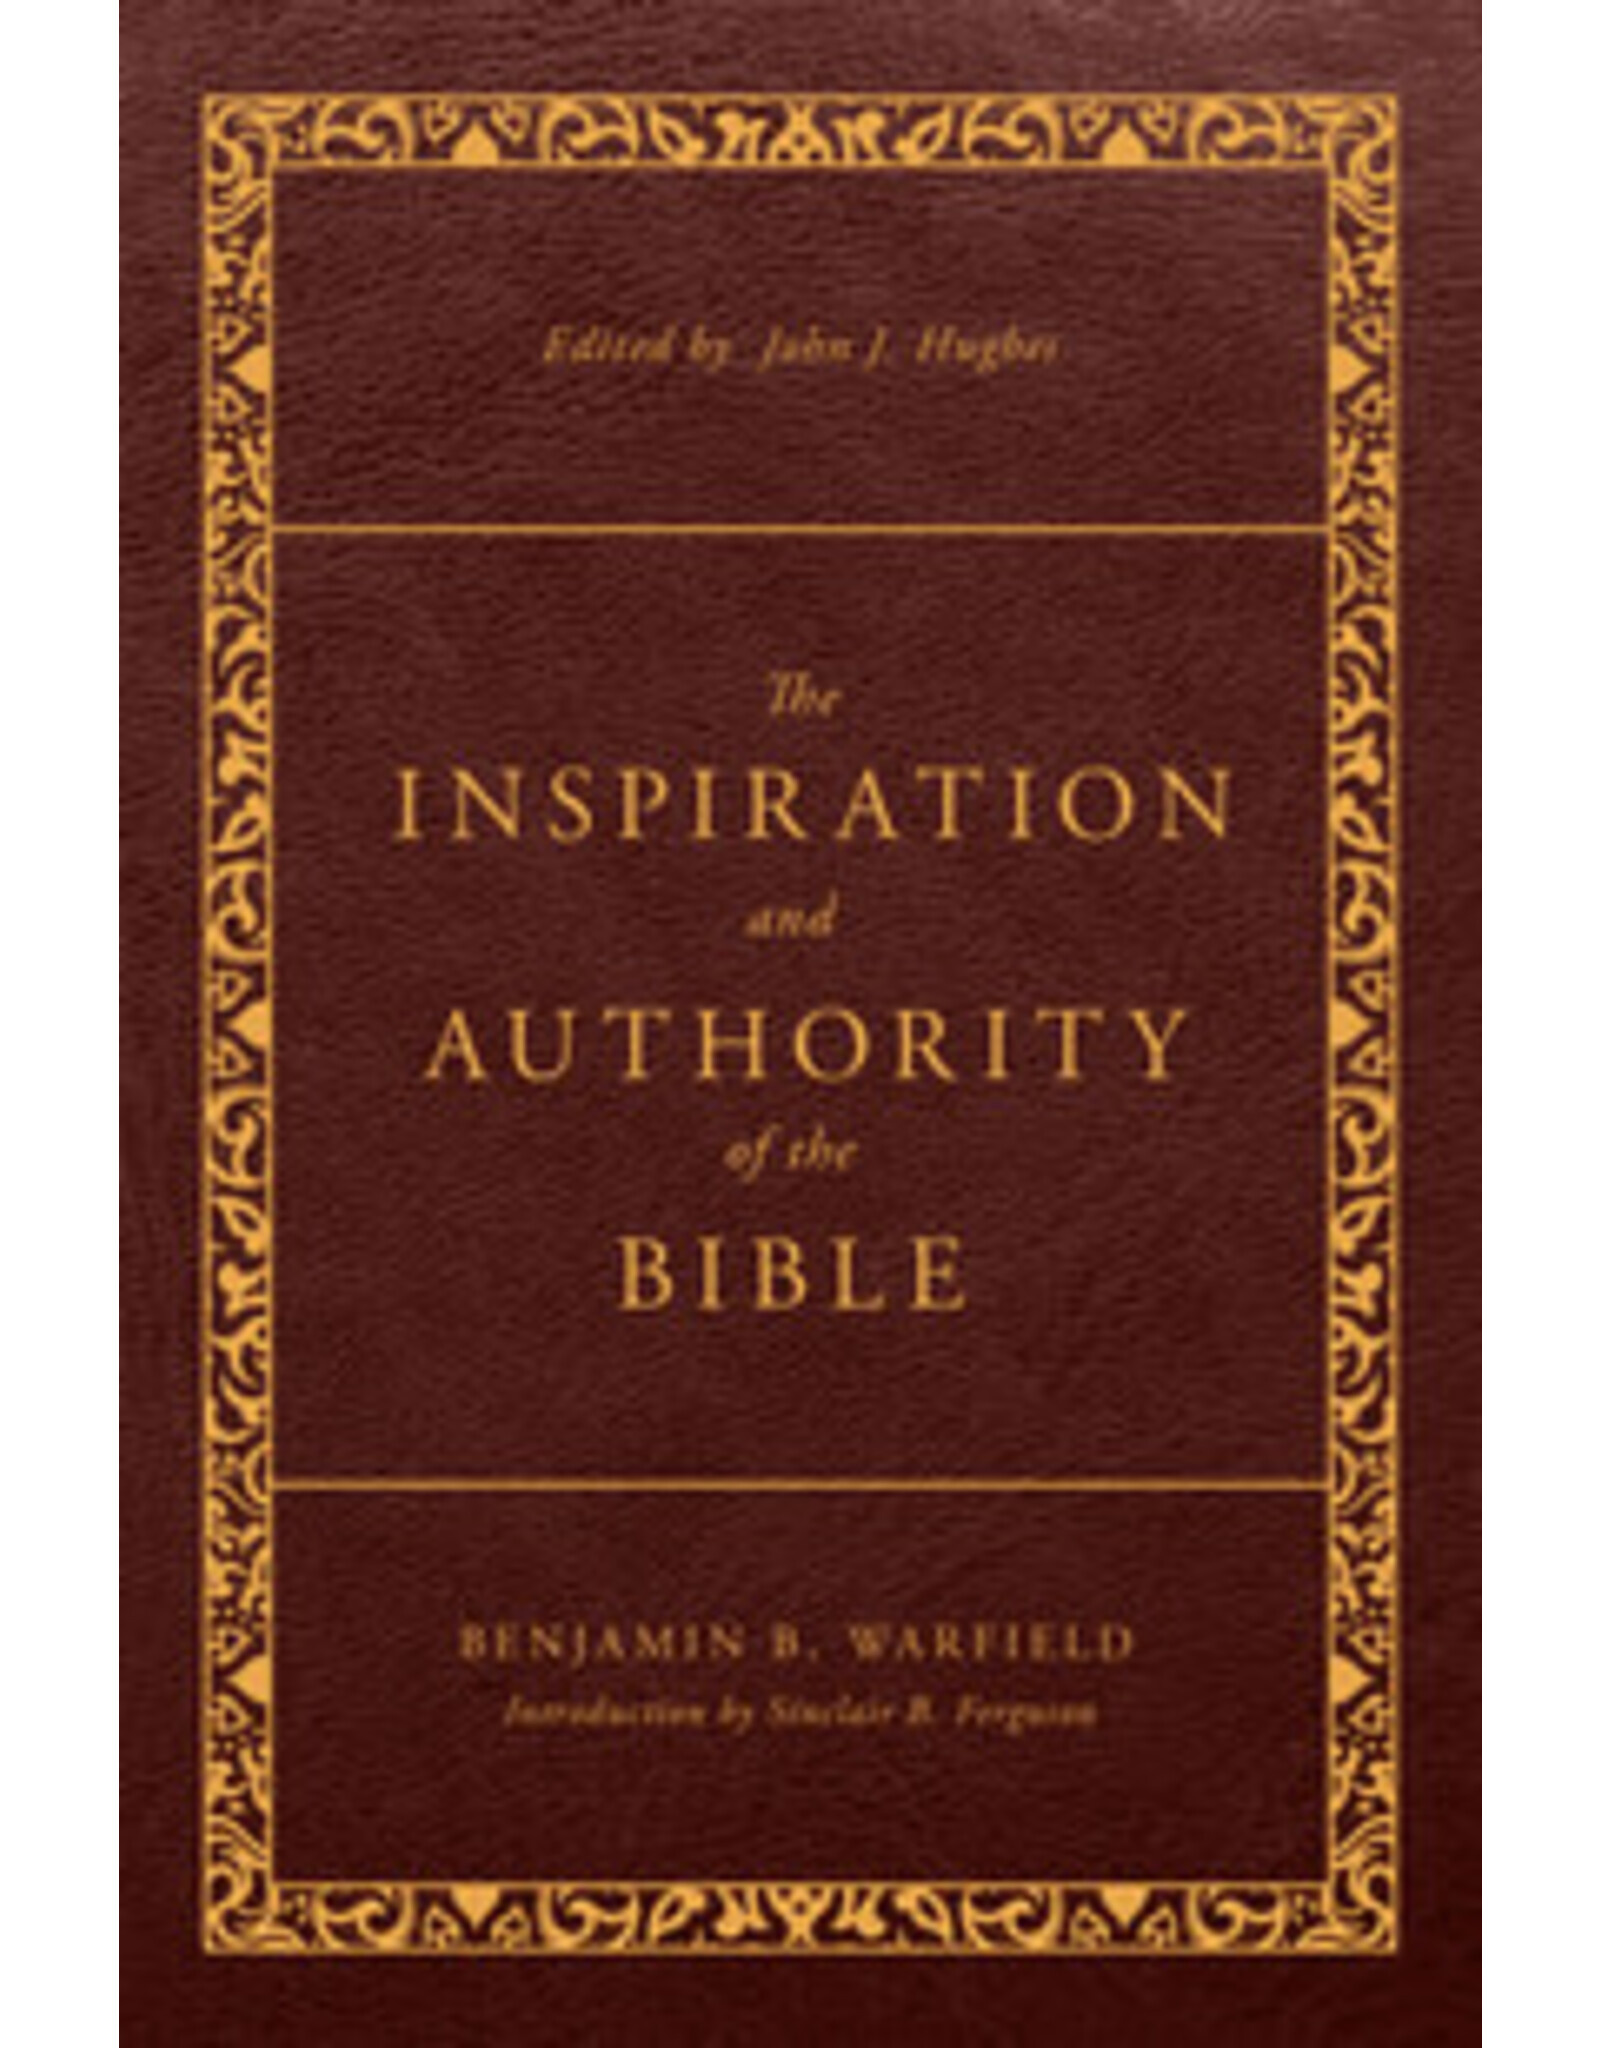 Benjamin .B. Warfield The Inspiration and Authority of the Bible